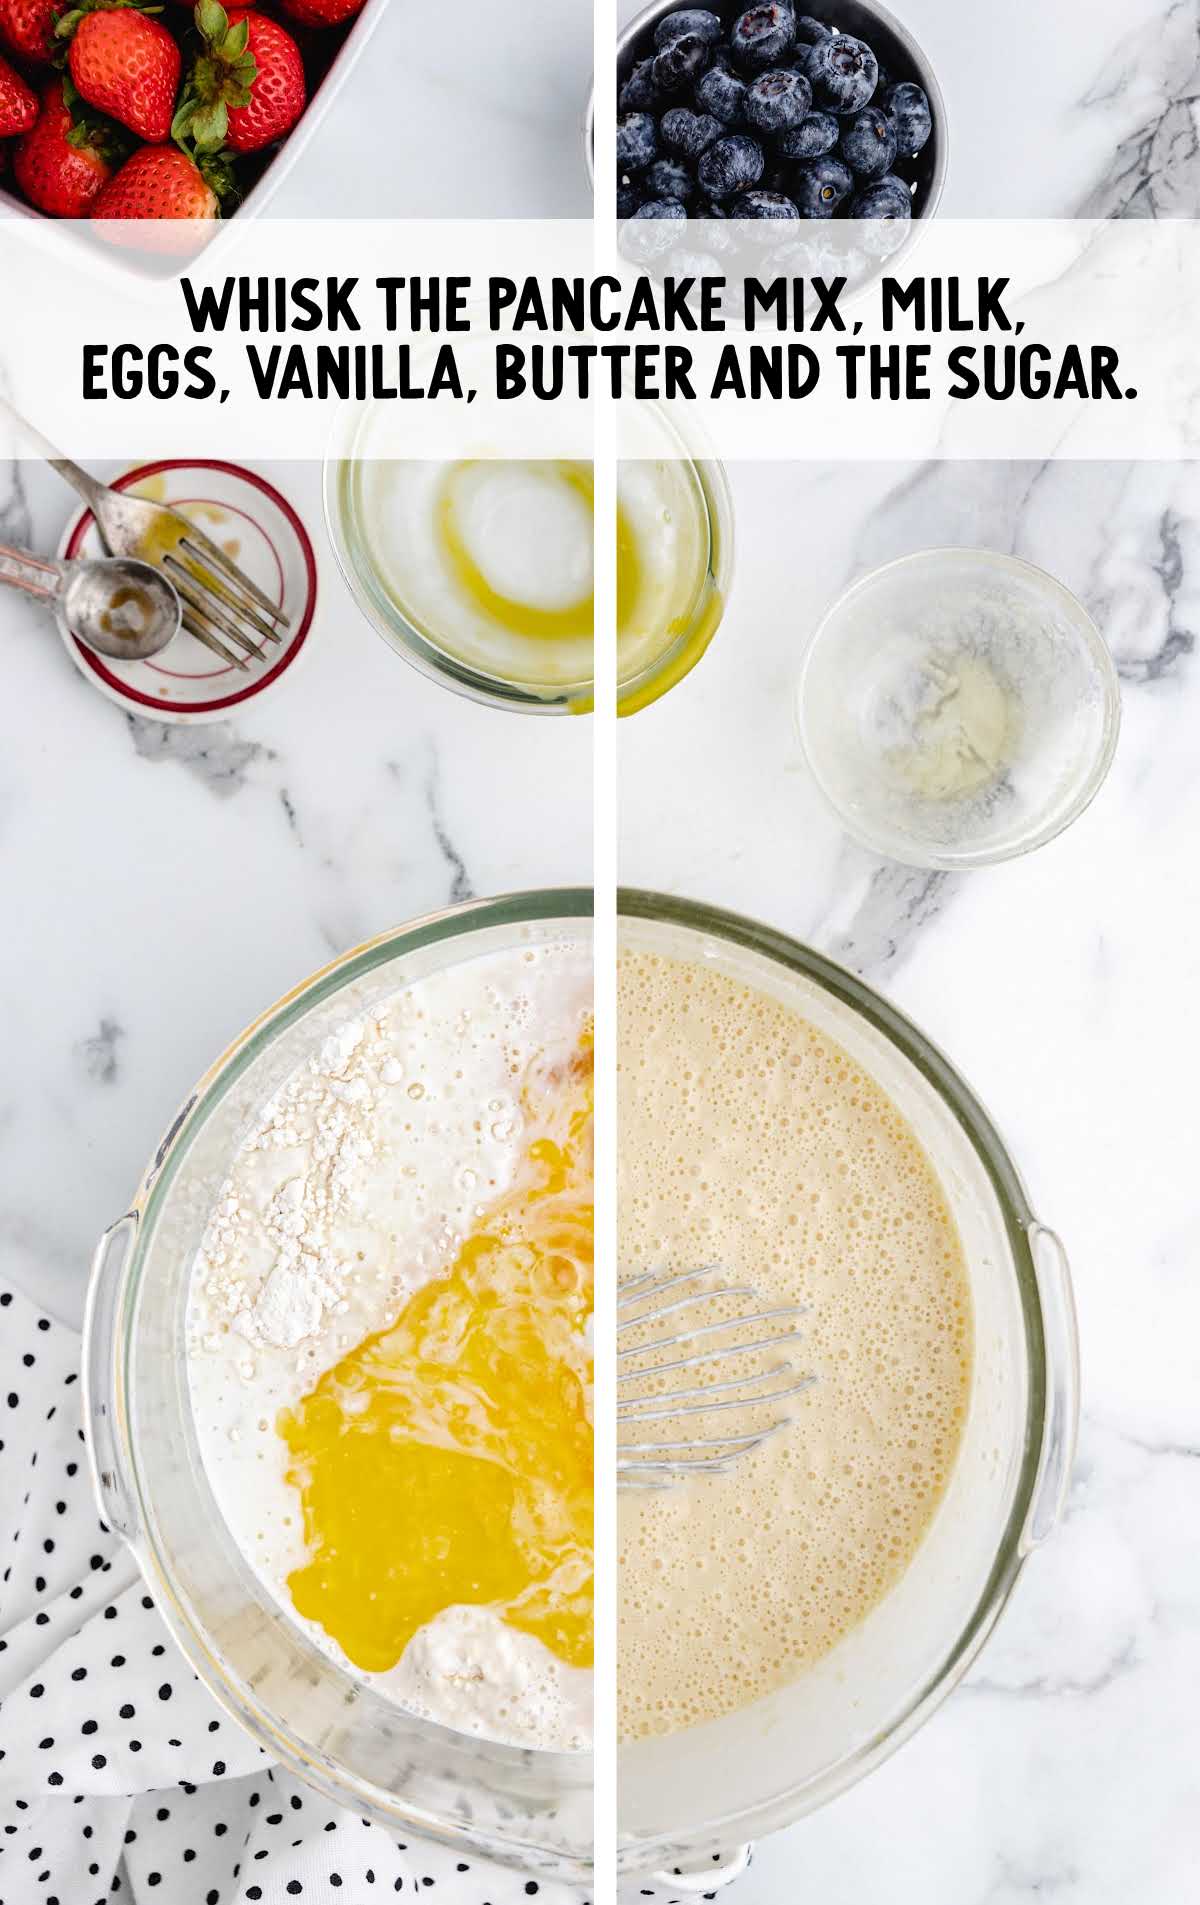 pancake mix, milk, eggs, vanilla, melted butter, and sugar whisked together in a bowl